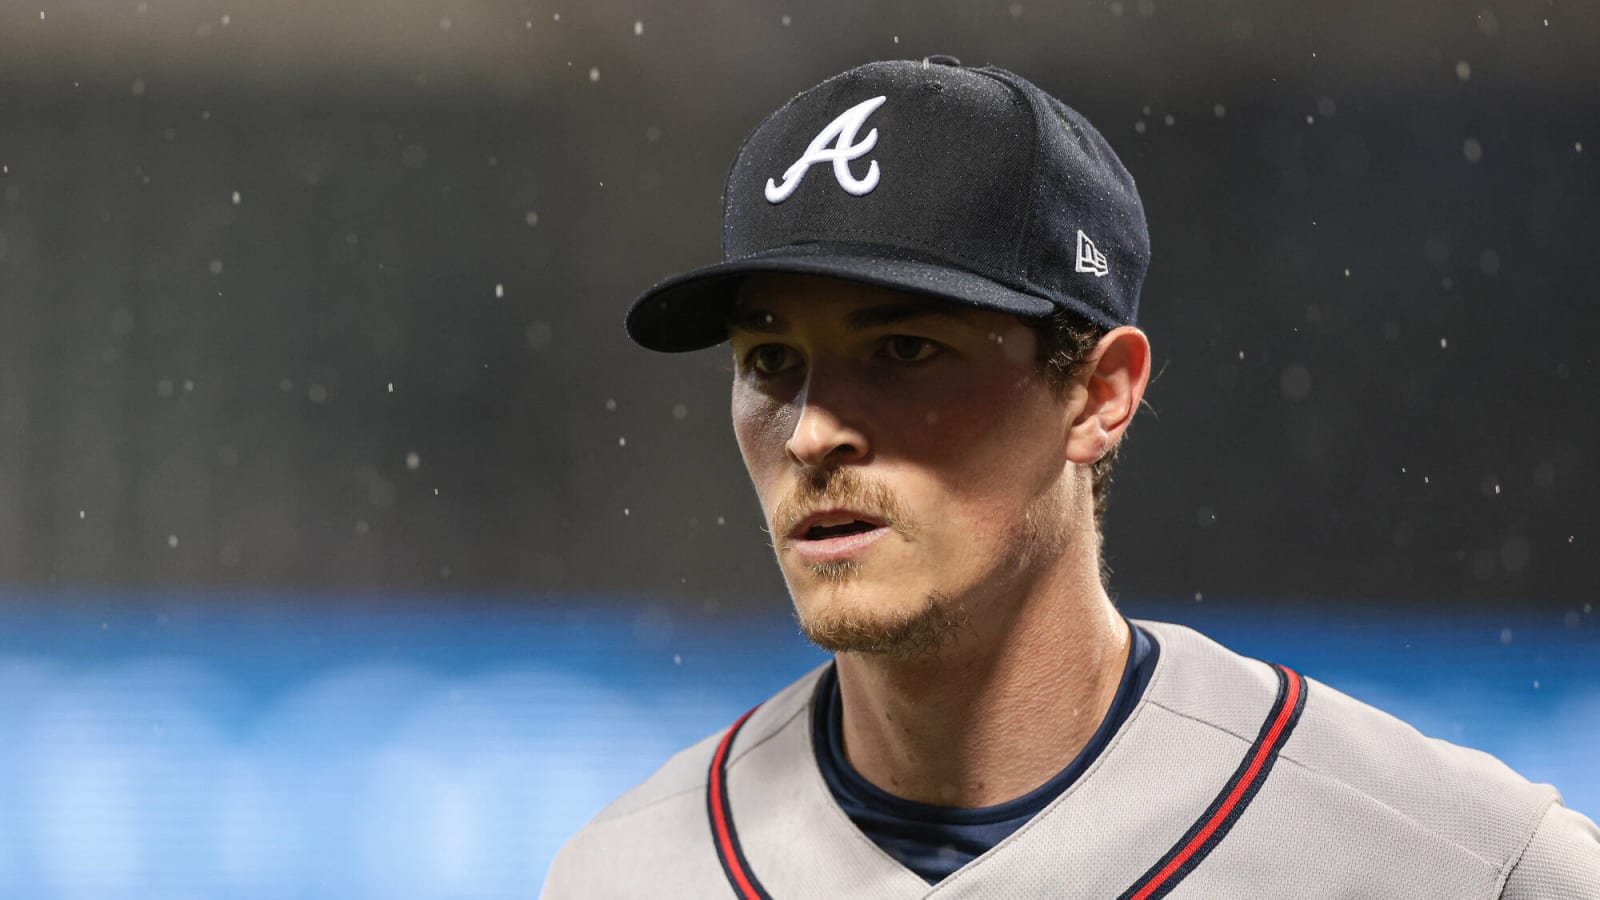 Alex Anthopoulos has some interesting comments about Max Fried and the trade deadline